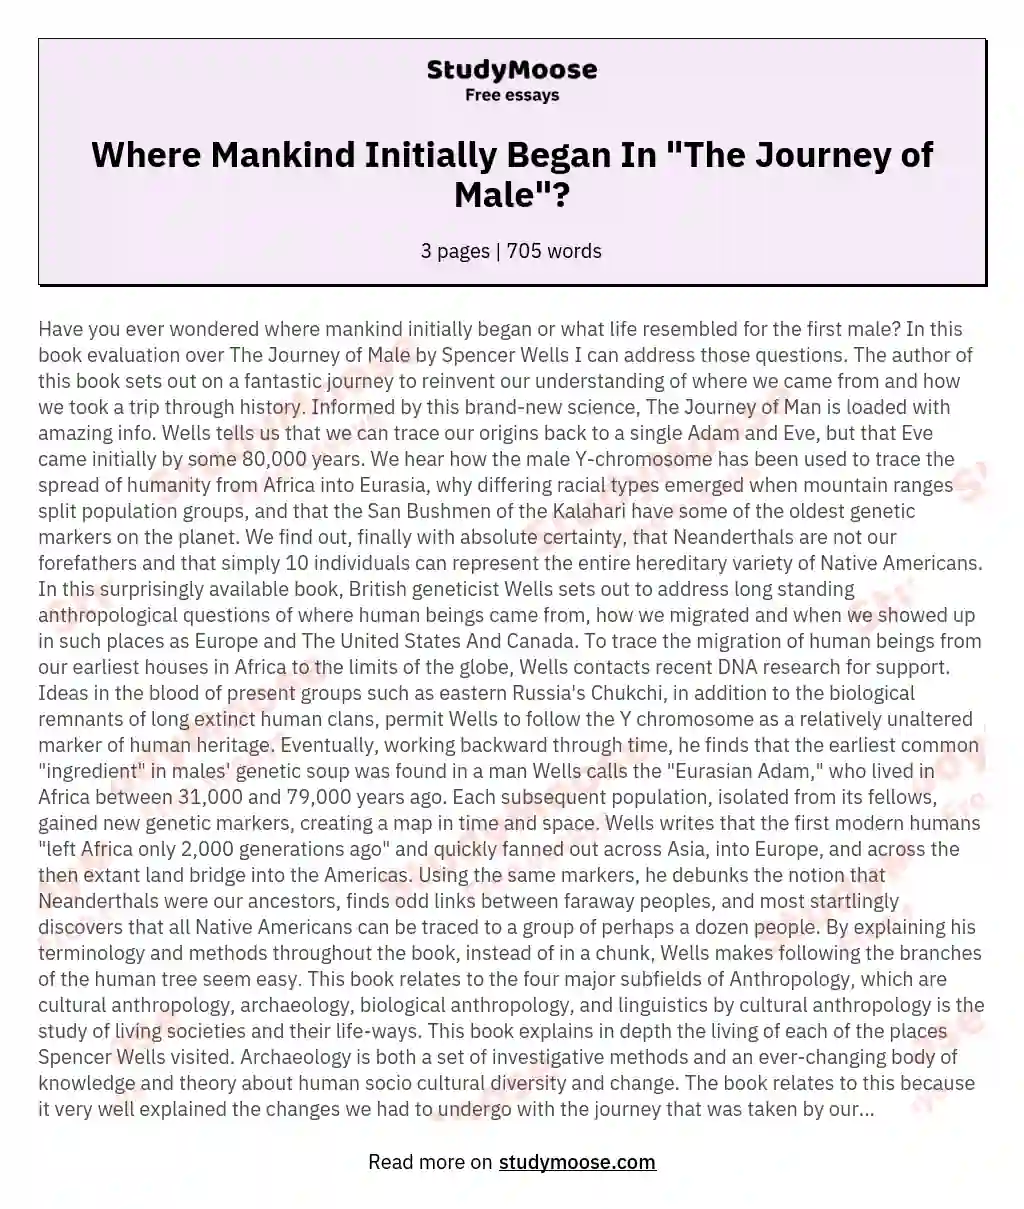 Where Mankind Initially Began In "The Journey of Male"? essay